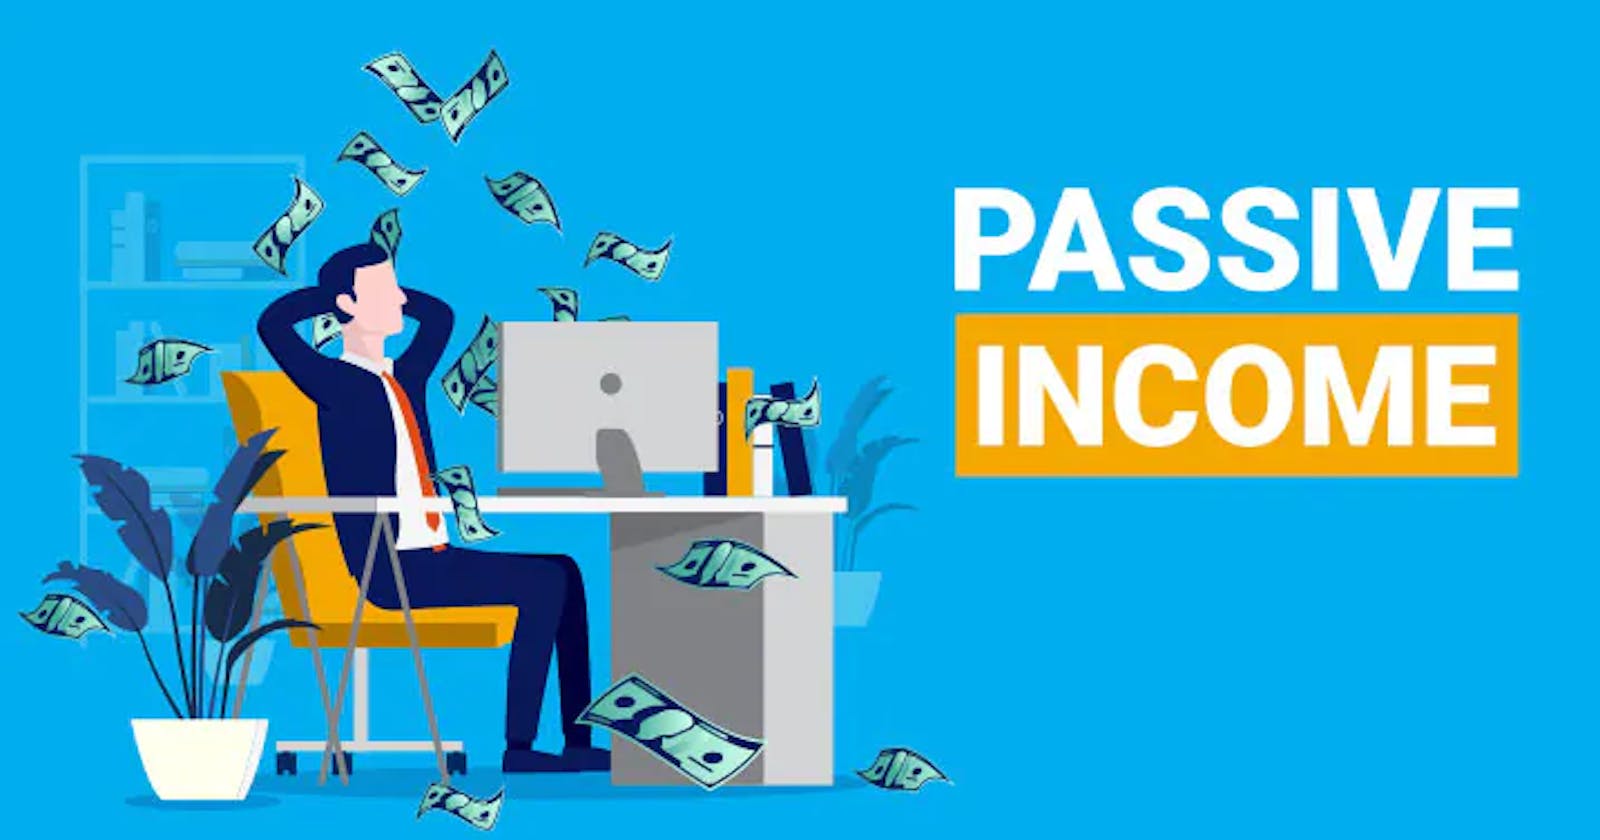 Monetize Your Skills: 10 Stupid Passive Income Ideas for Coders